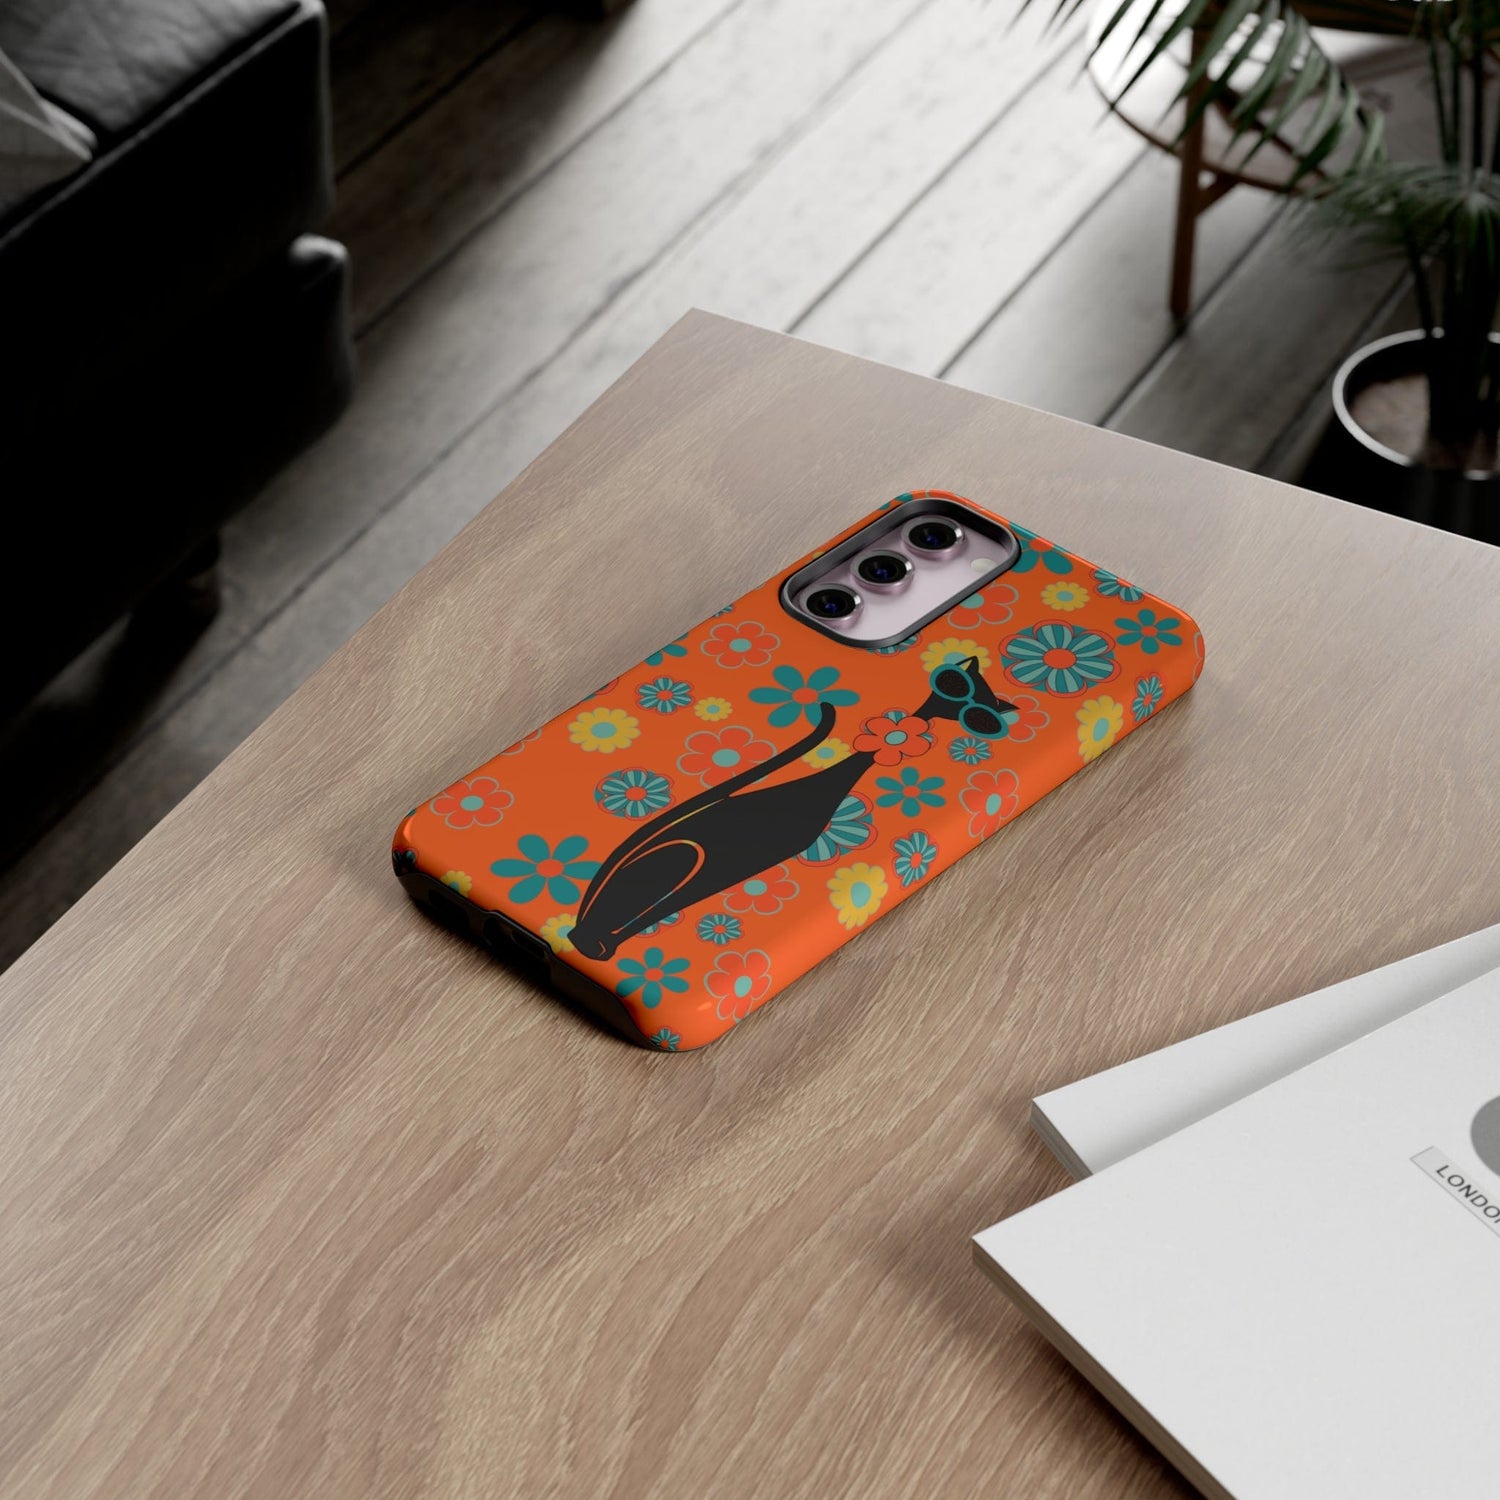 Flower Power, Retro Groovy Atomic Cat, Hipster Style Orange Samsung Galaxy and Google Pixel Tough Cases Phone Case